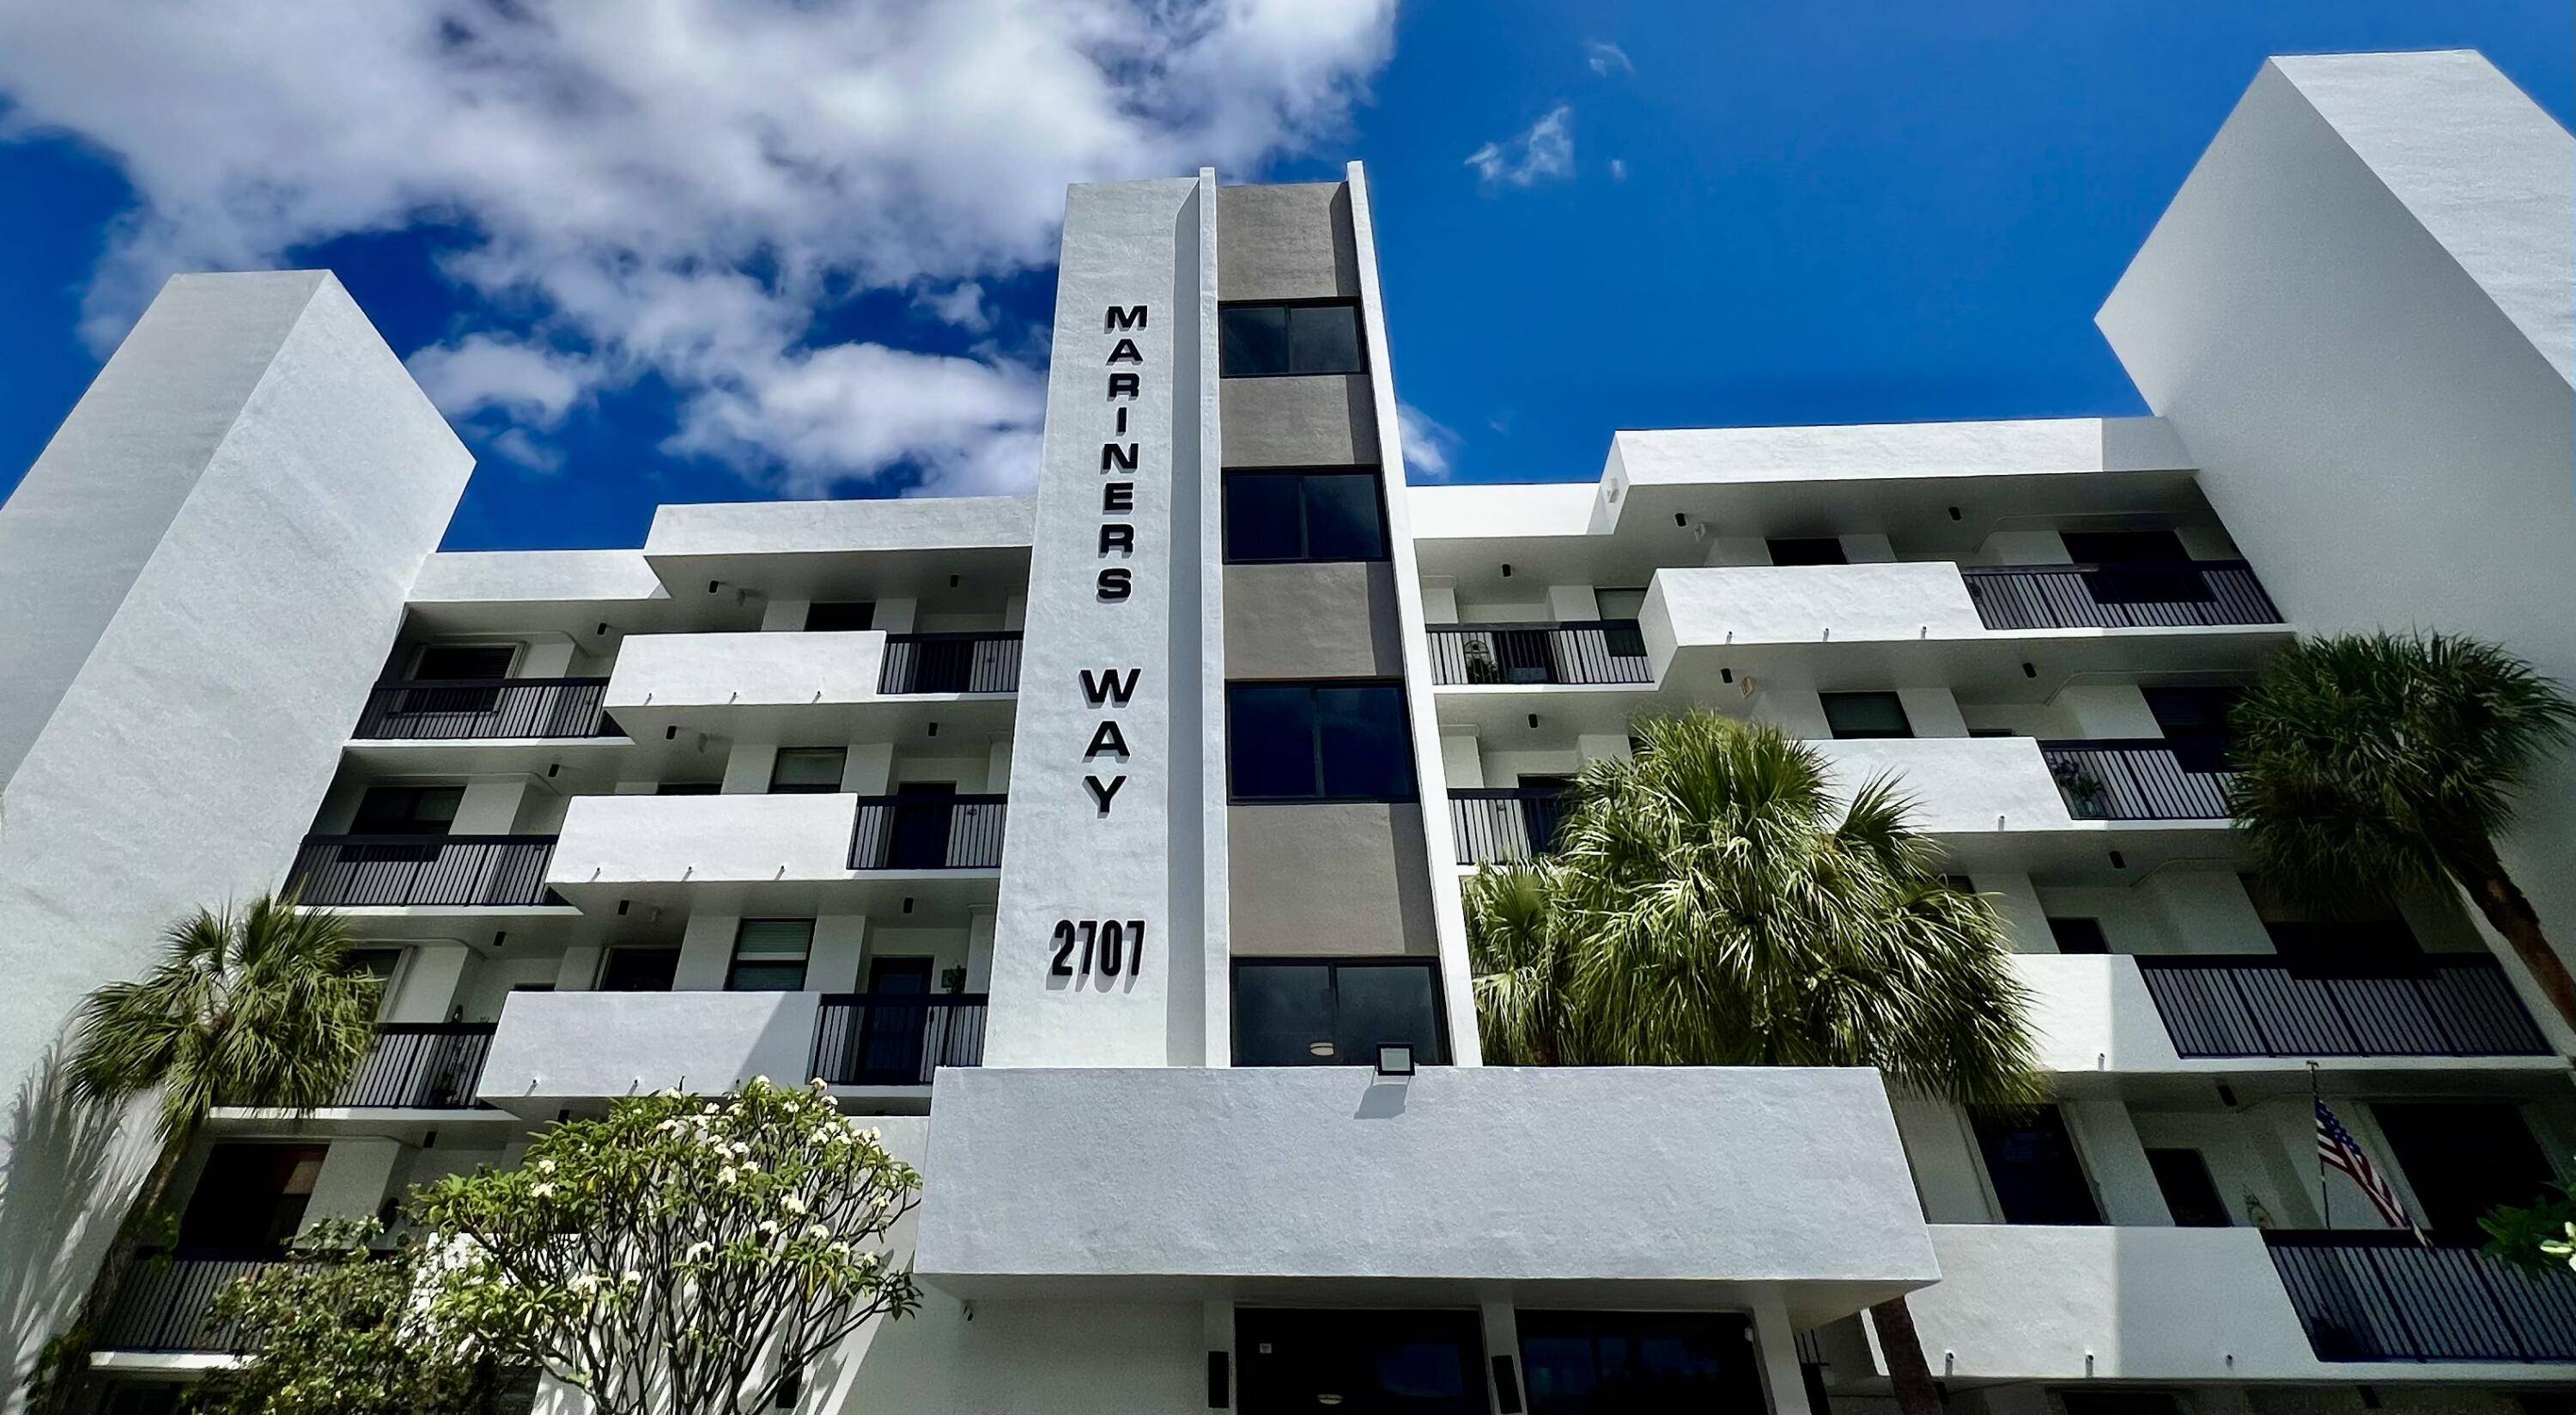 Welcome to Mariners Way, featuring an Art Deco chic design in a quiet quaint community.